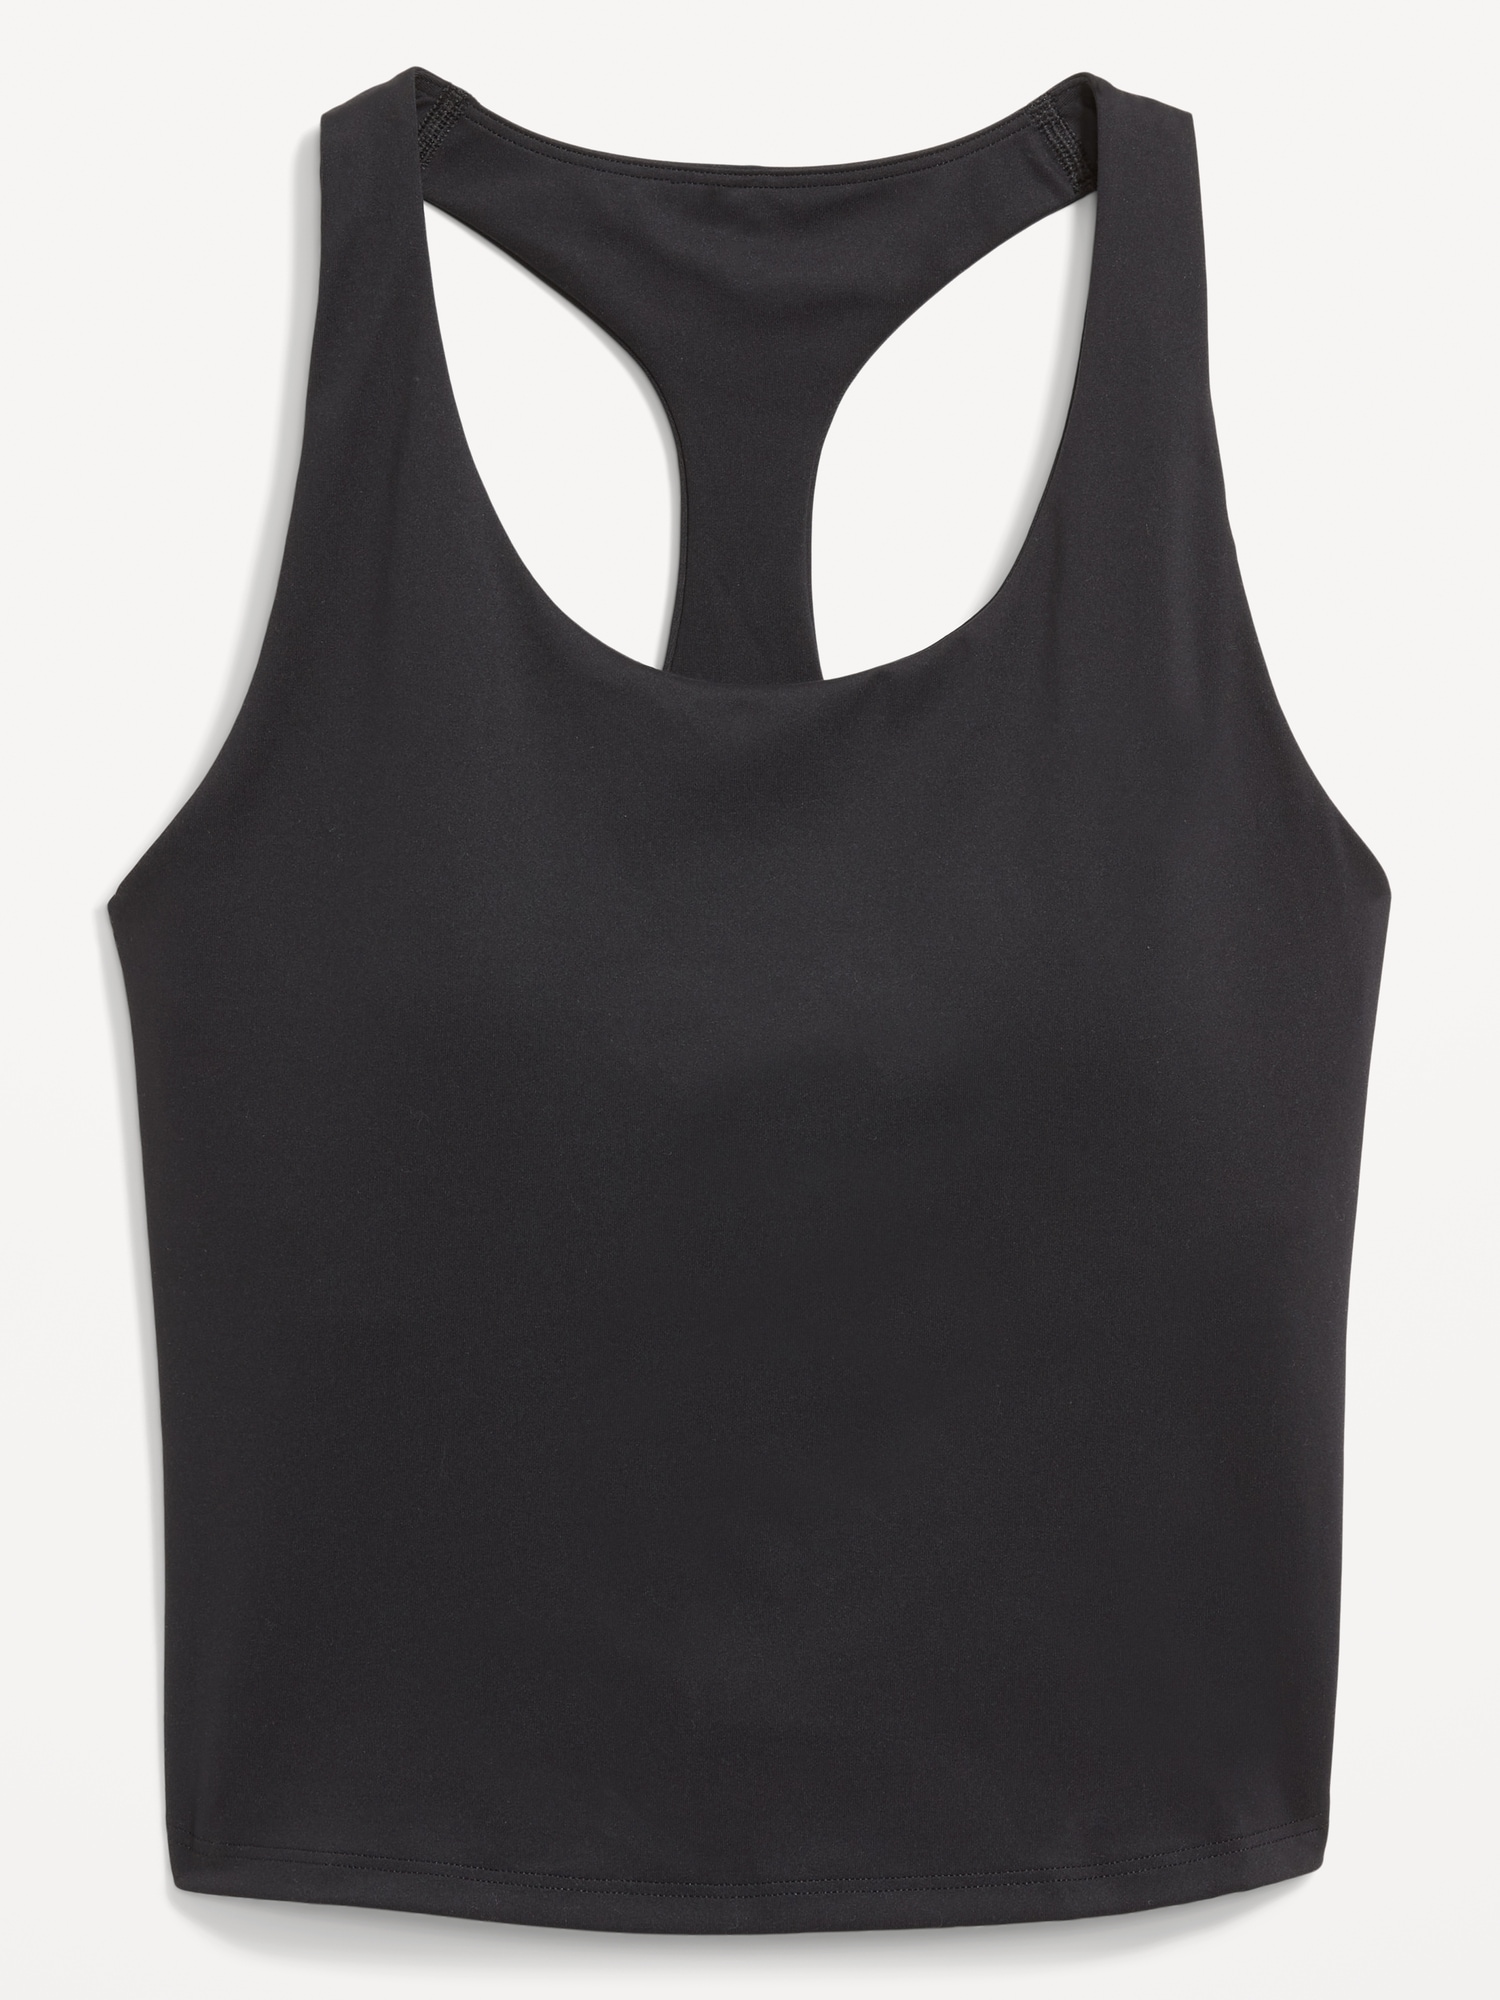 Old Navy PowerSoft Cropped Shelf-Bra Tank Top Review